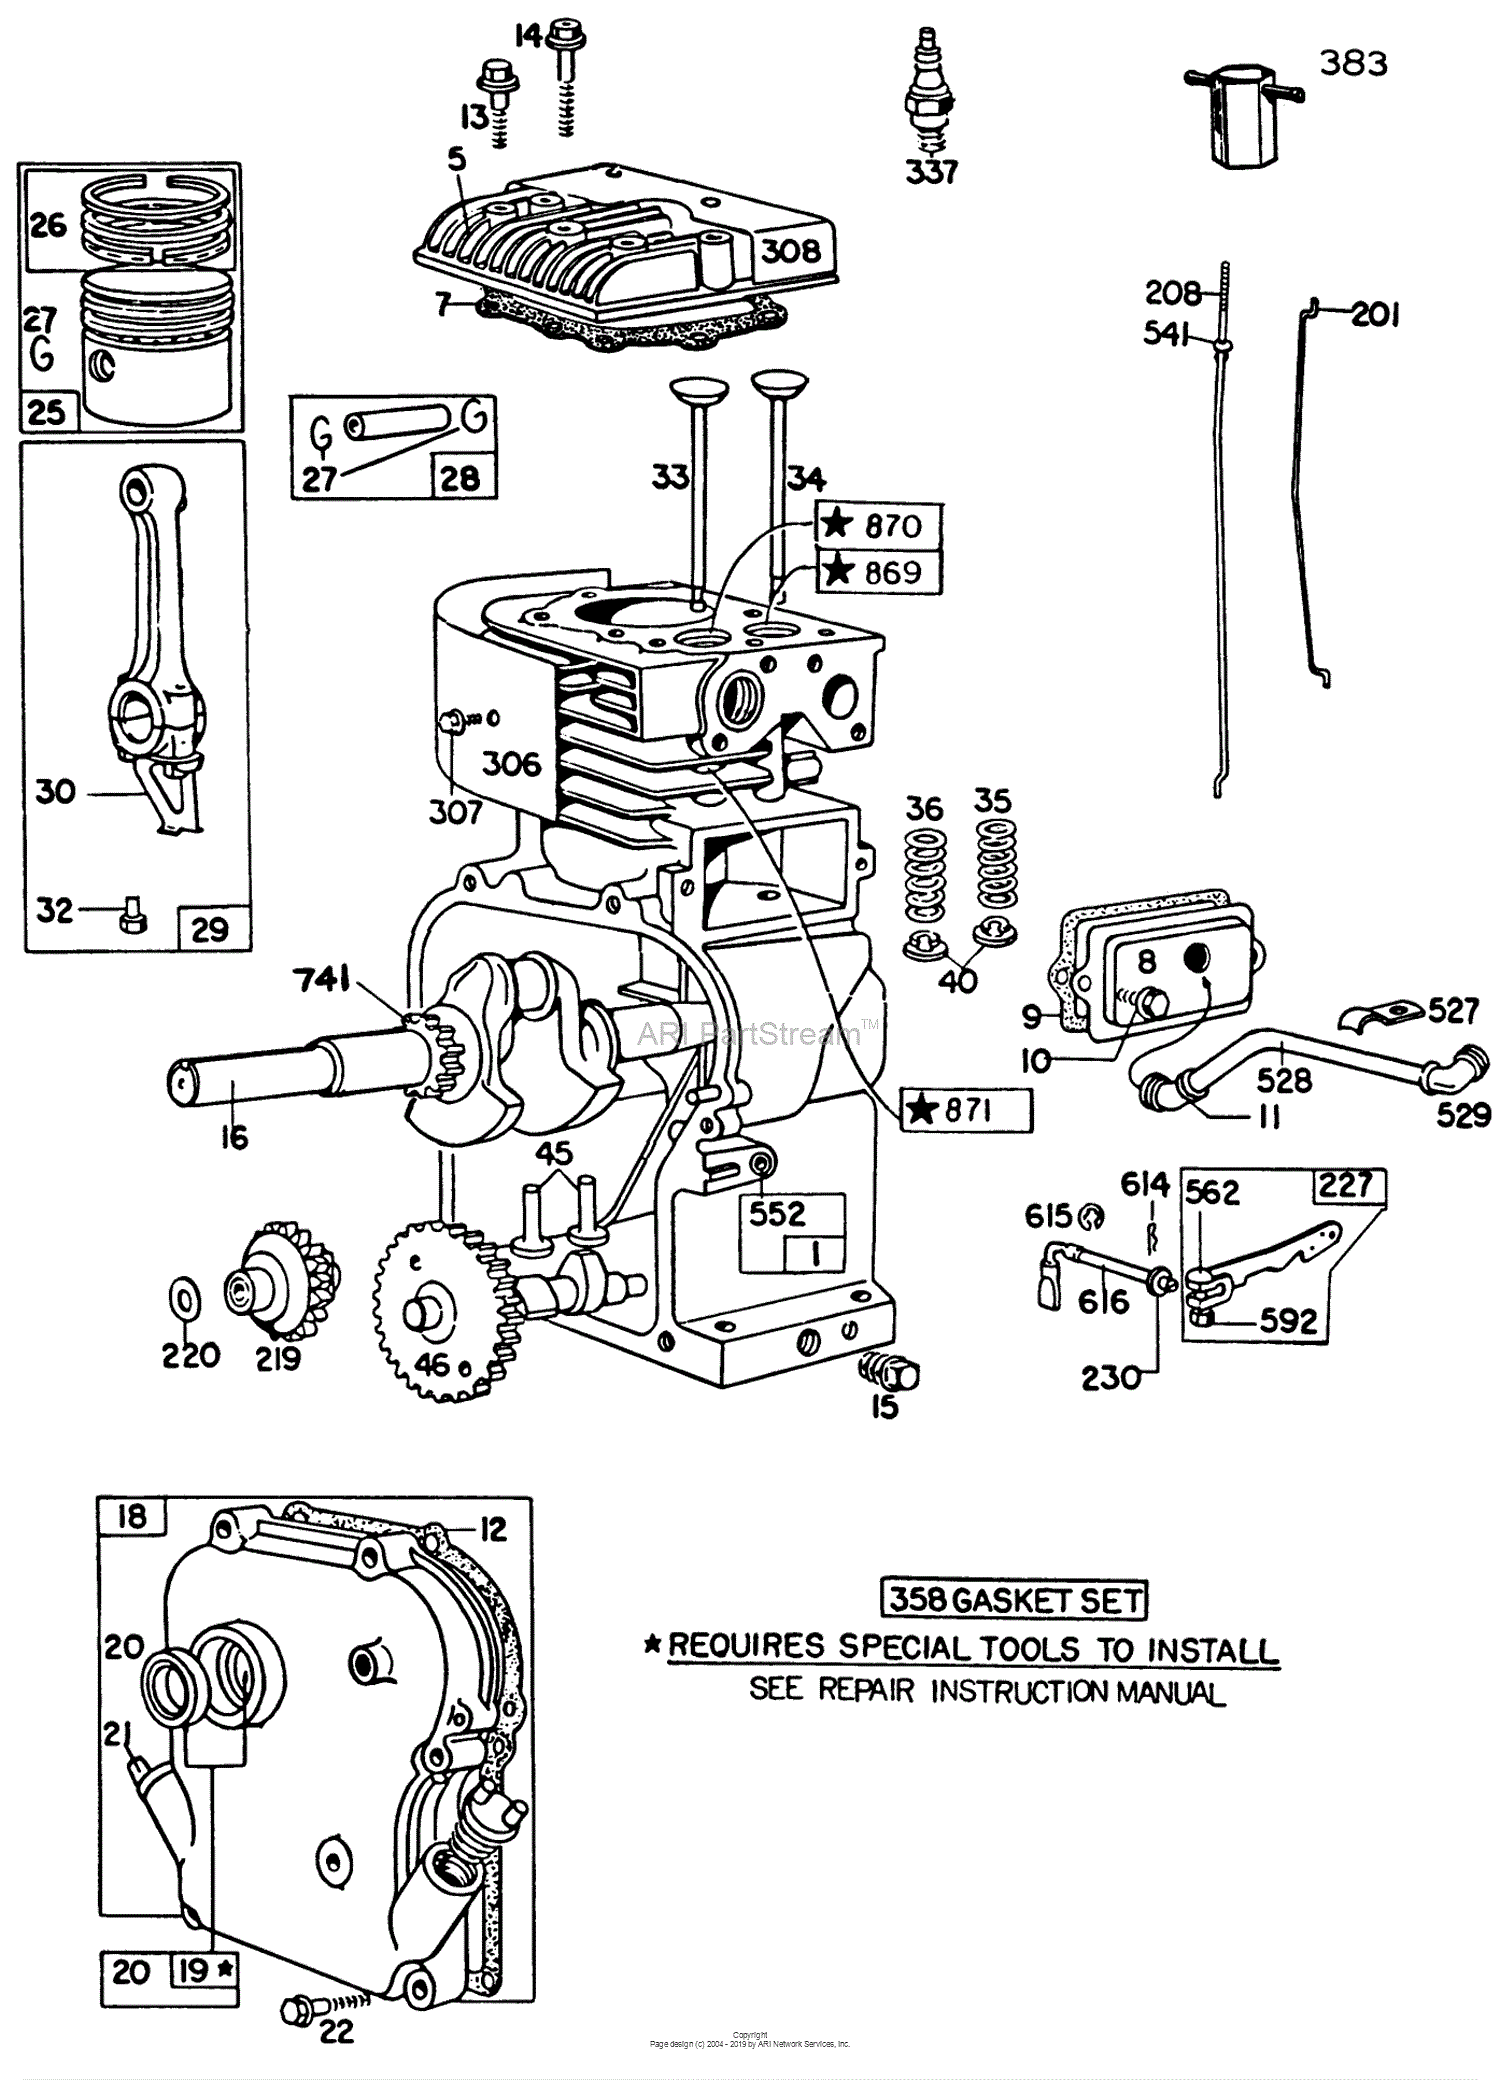 Briggs And Stratton Throttle Linkage Diagram 5hp - Wiring Diagram